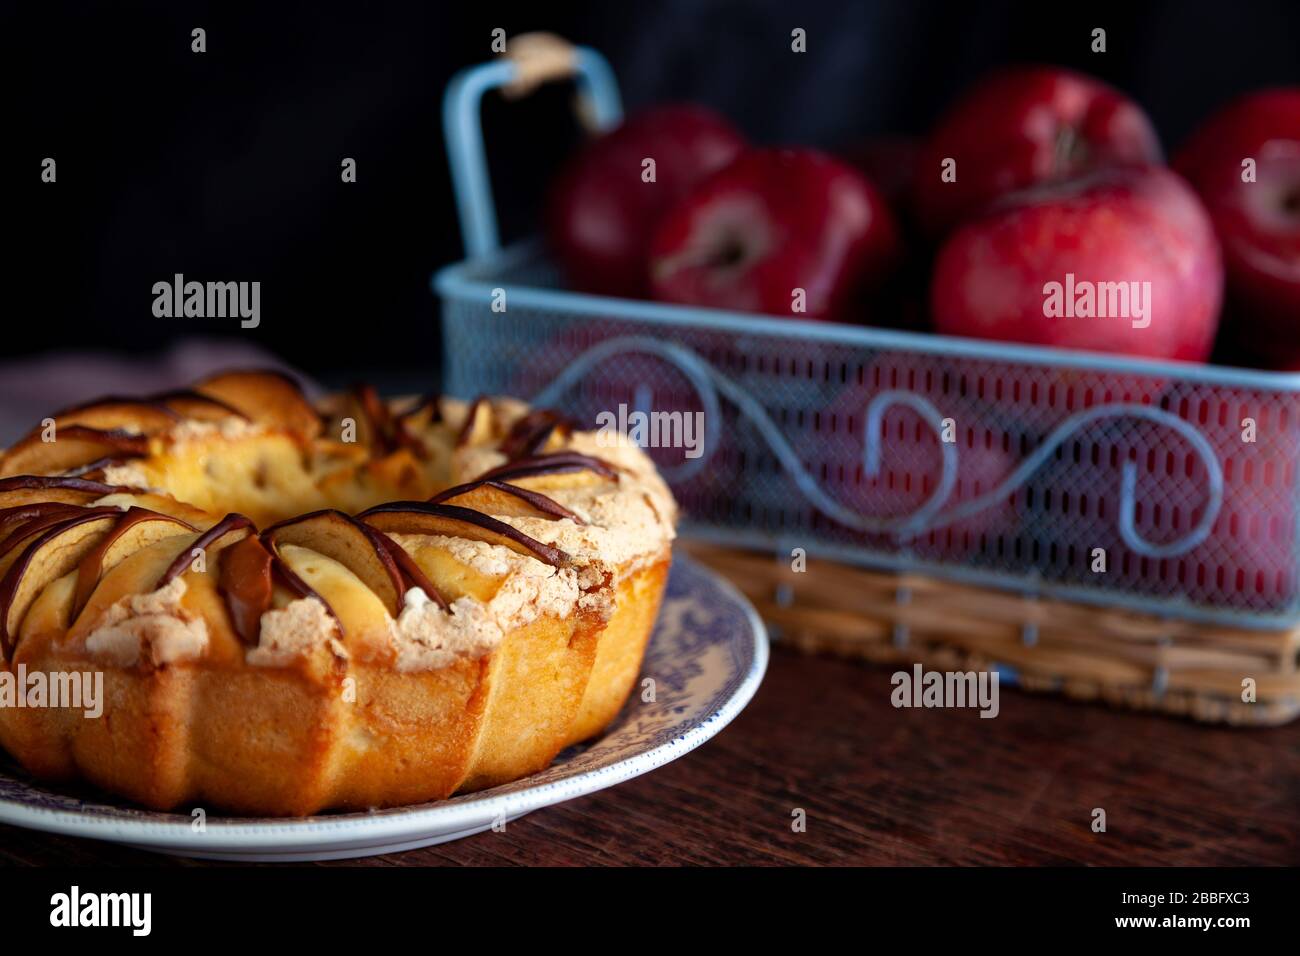 Round apple pie. Homemade pastries. Cupcake with apples on a wooden table. Simple food. Stock Photo